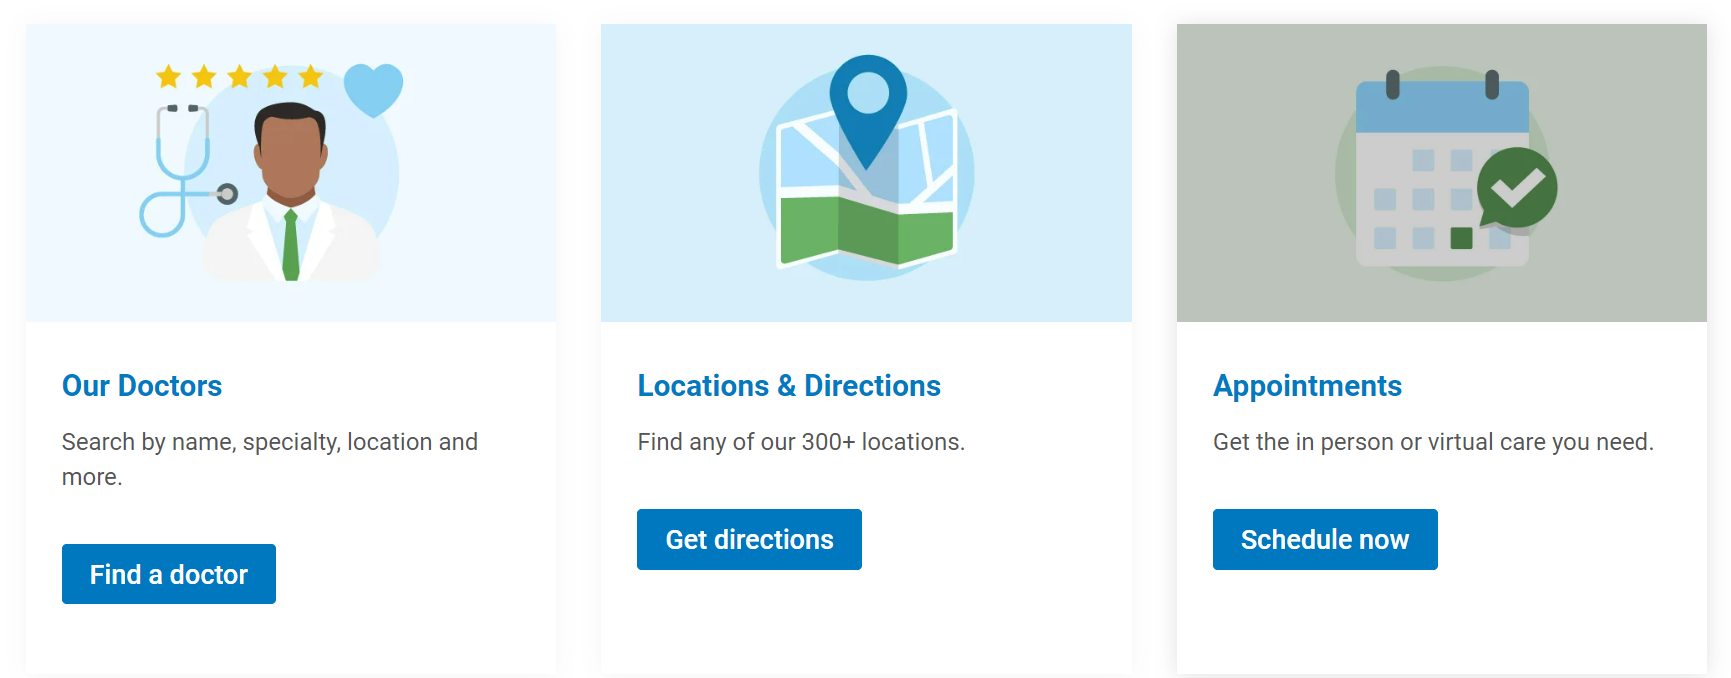 This image shows the calls to action on the Cleveland Clinic’s website, including “Find a doctor,” “Get directions,” and “Schedule now.”